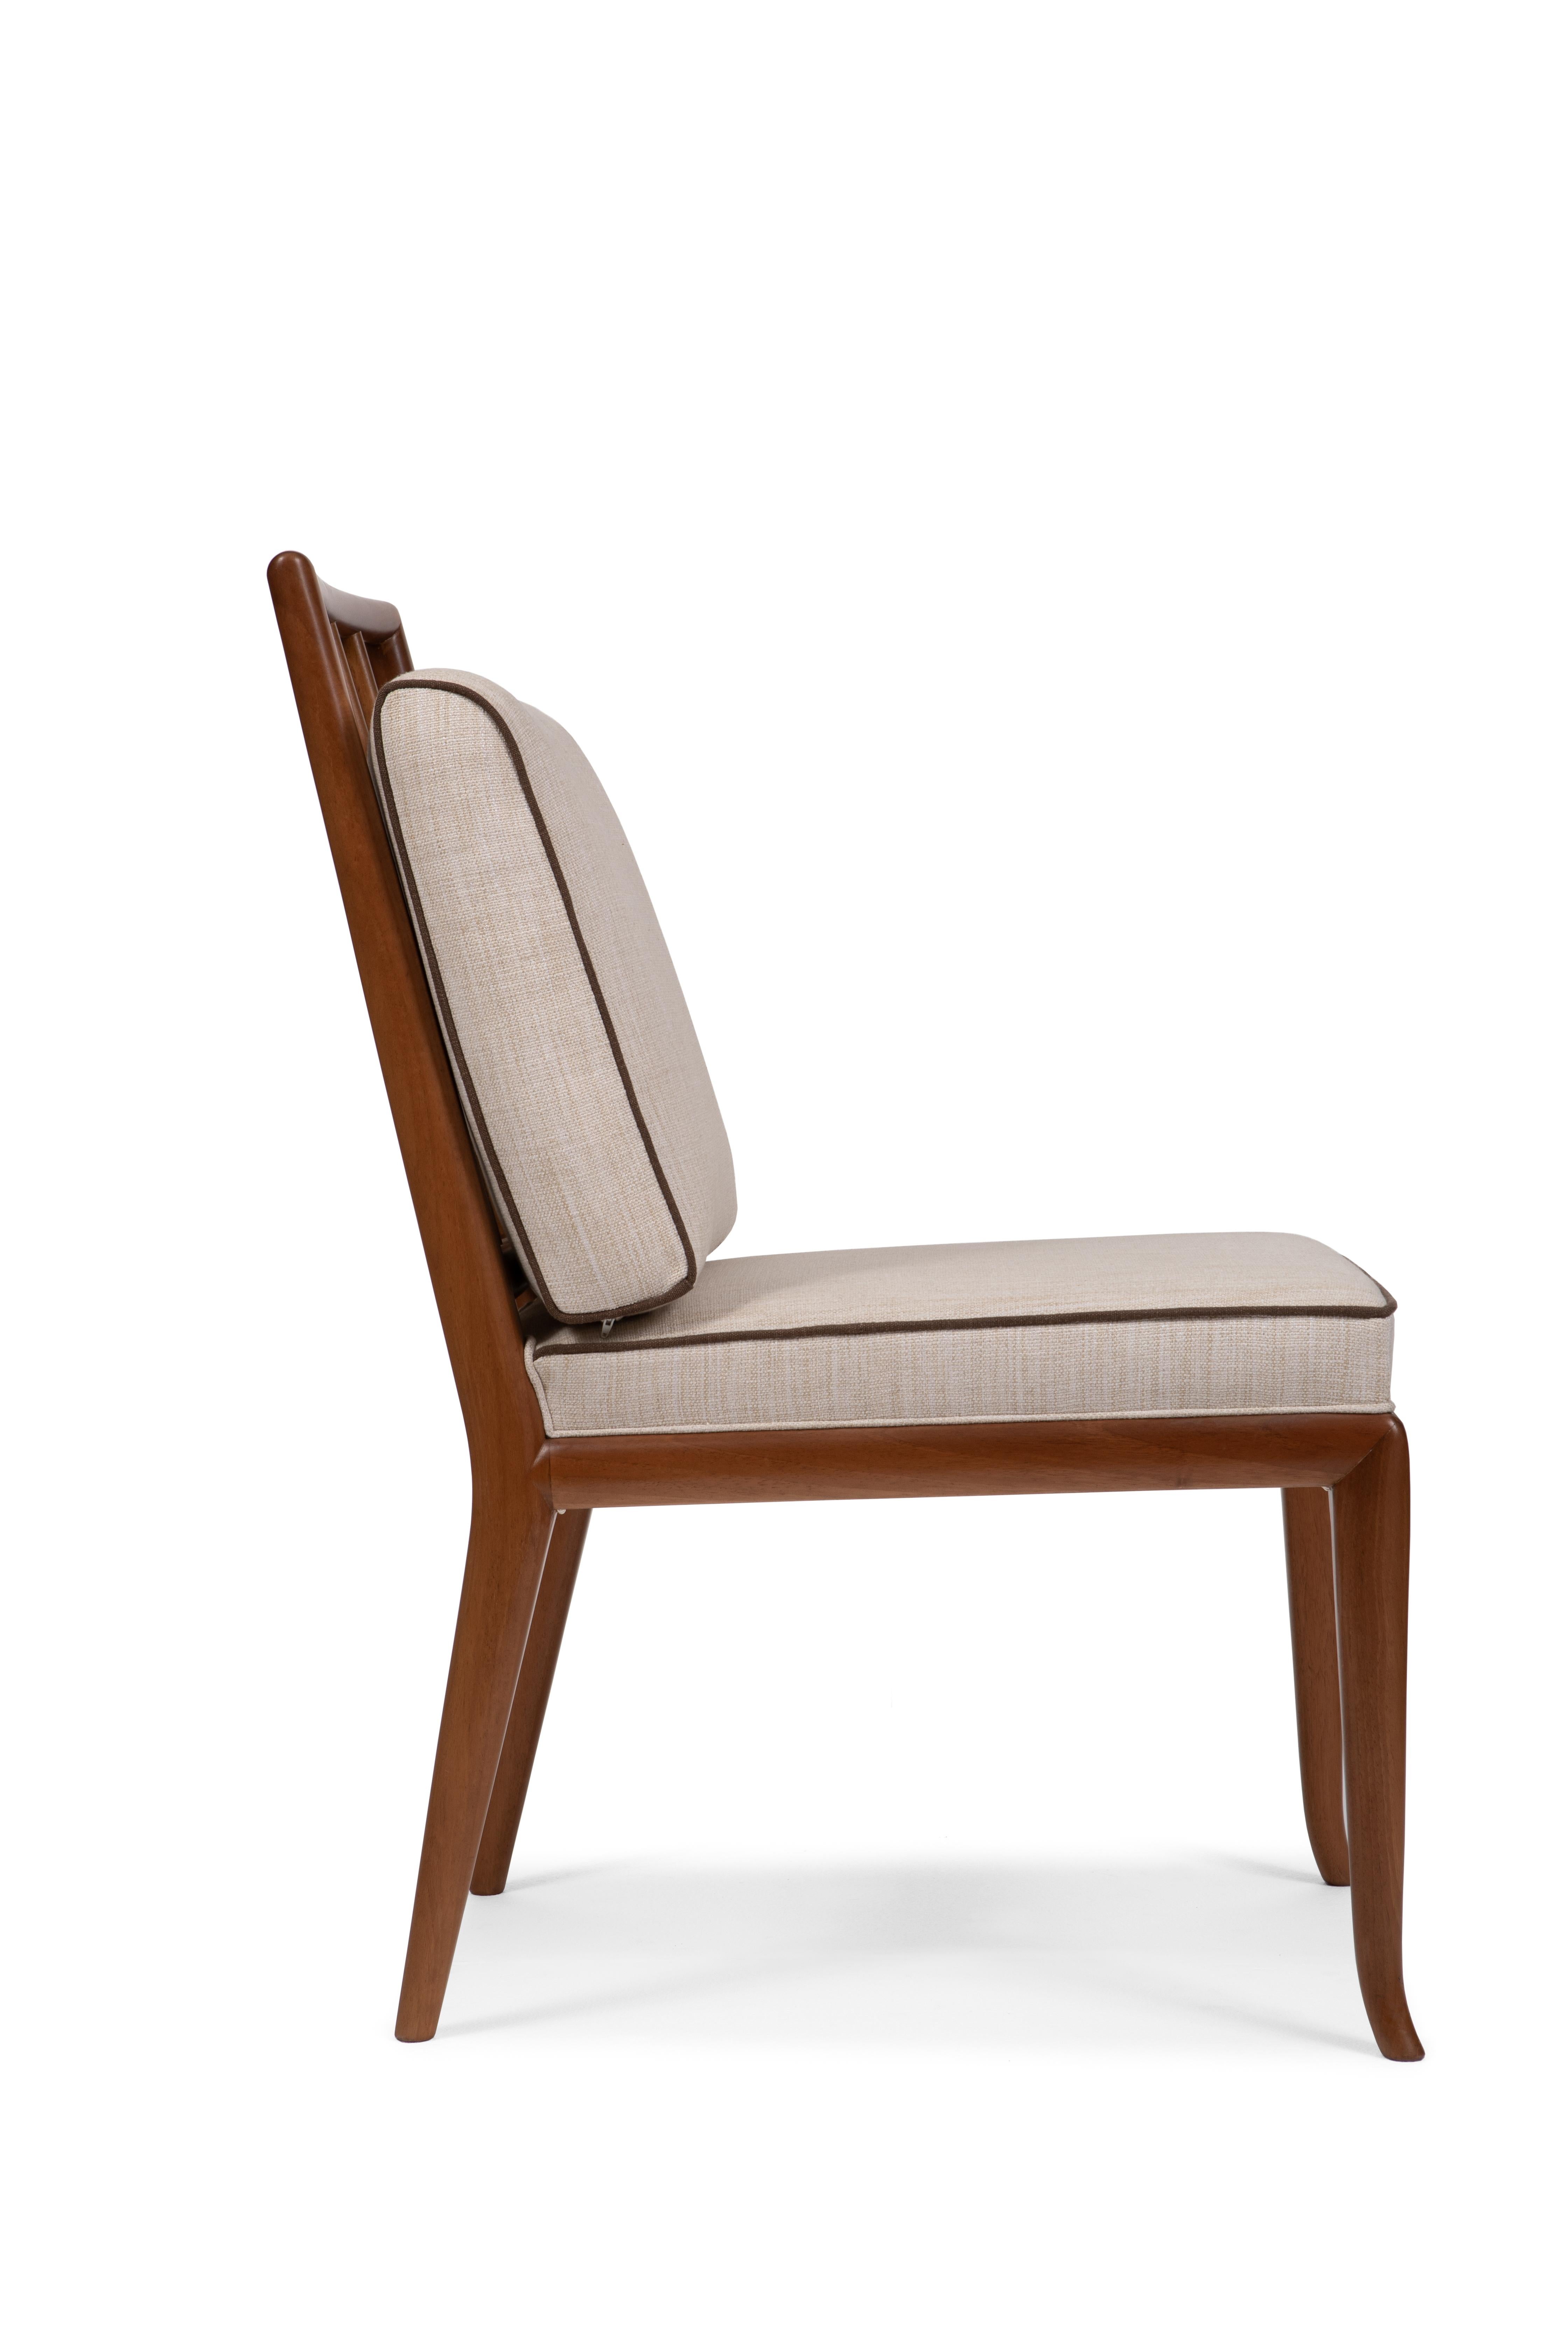 Modern Contemporary Style Walnut Frame Dining Chair, Made in Italy For Sale